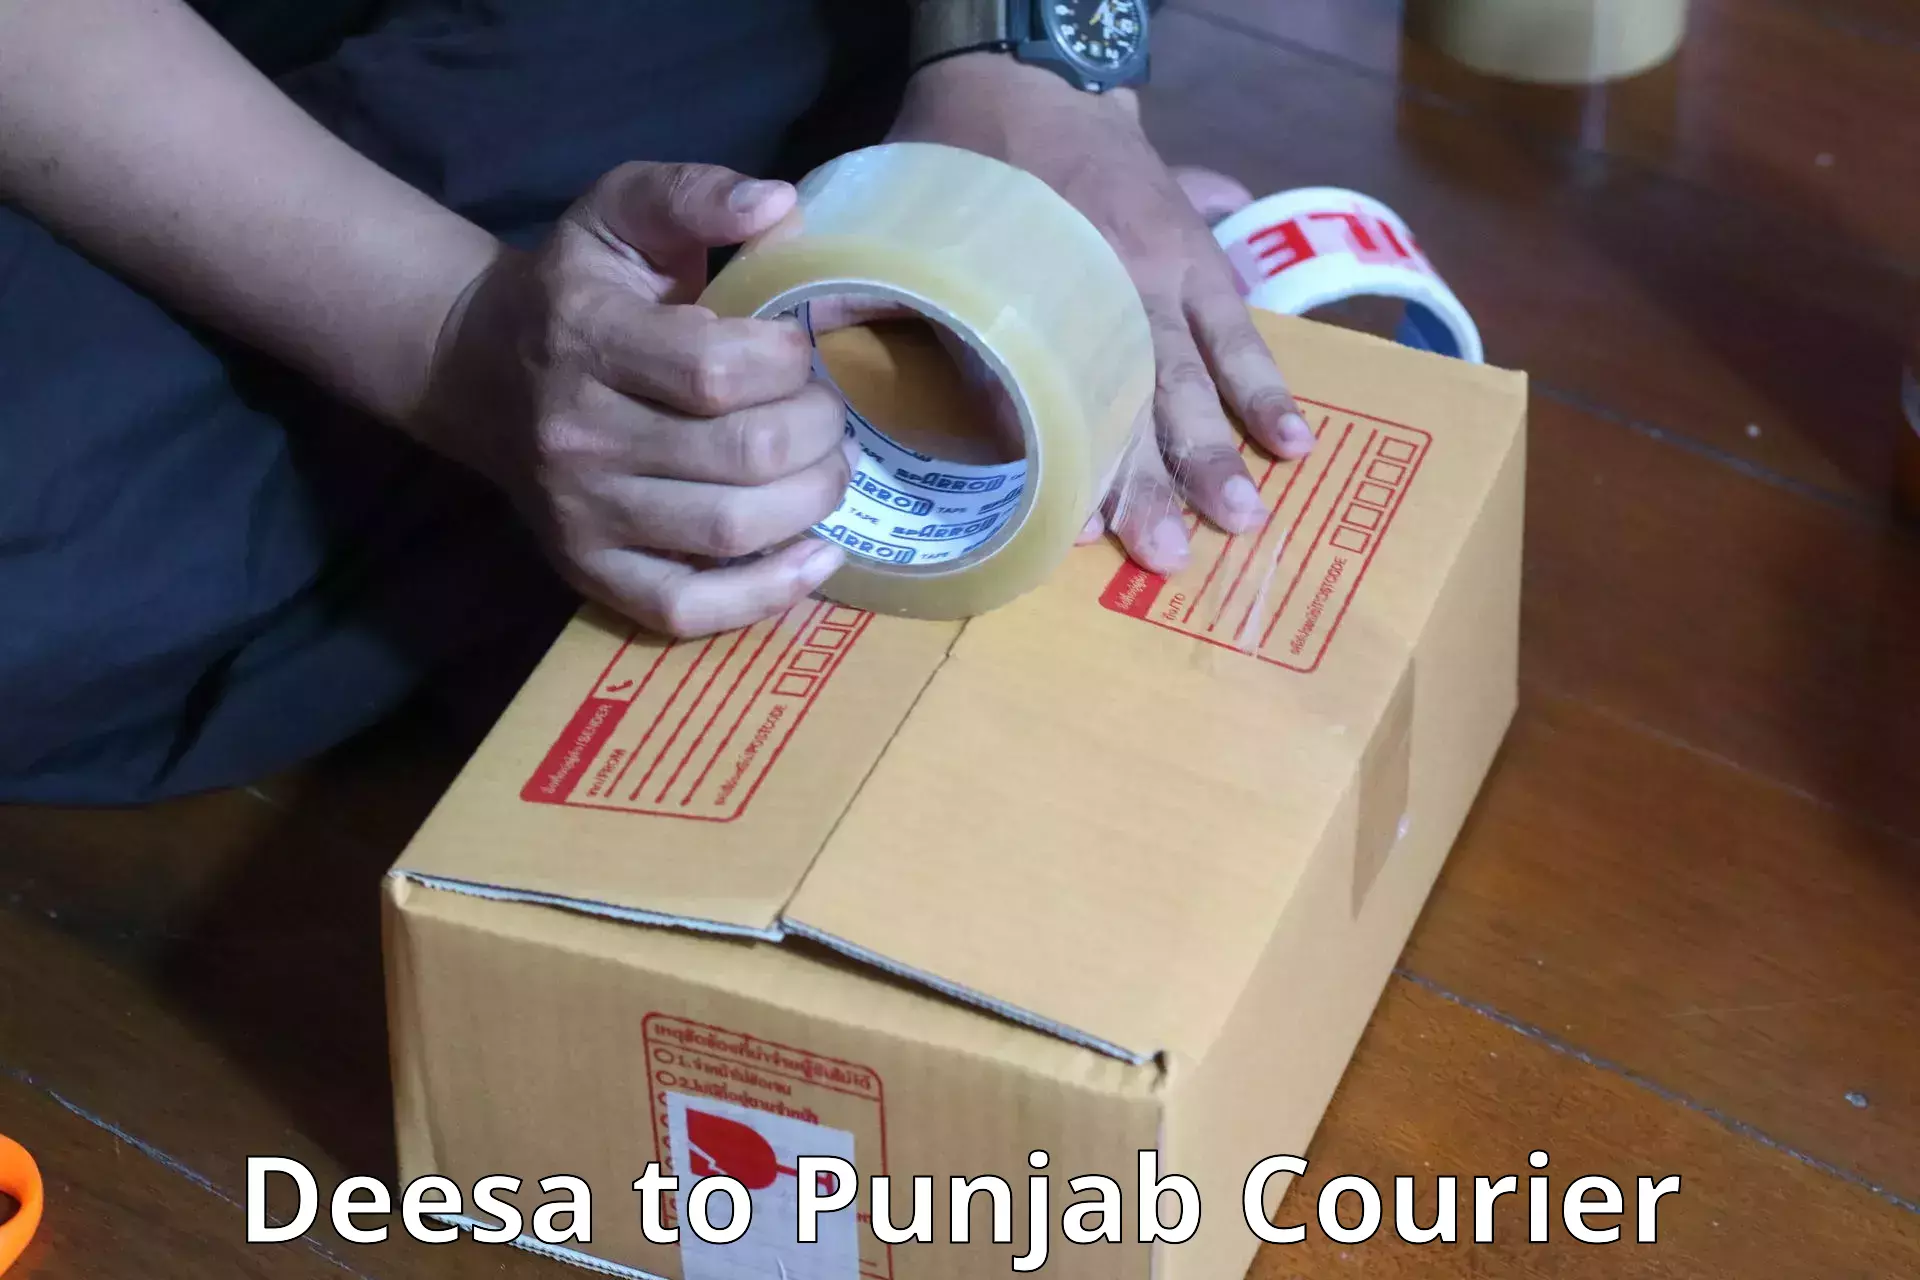 Luggage delivery system Deesa to Punjab